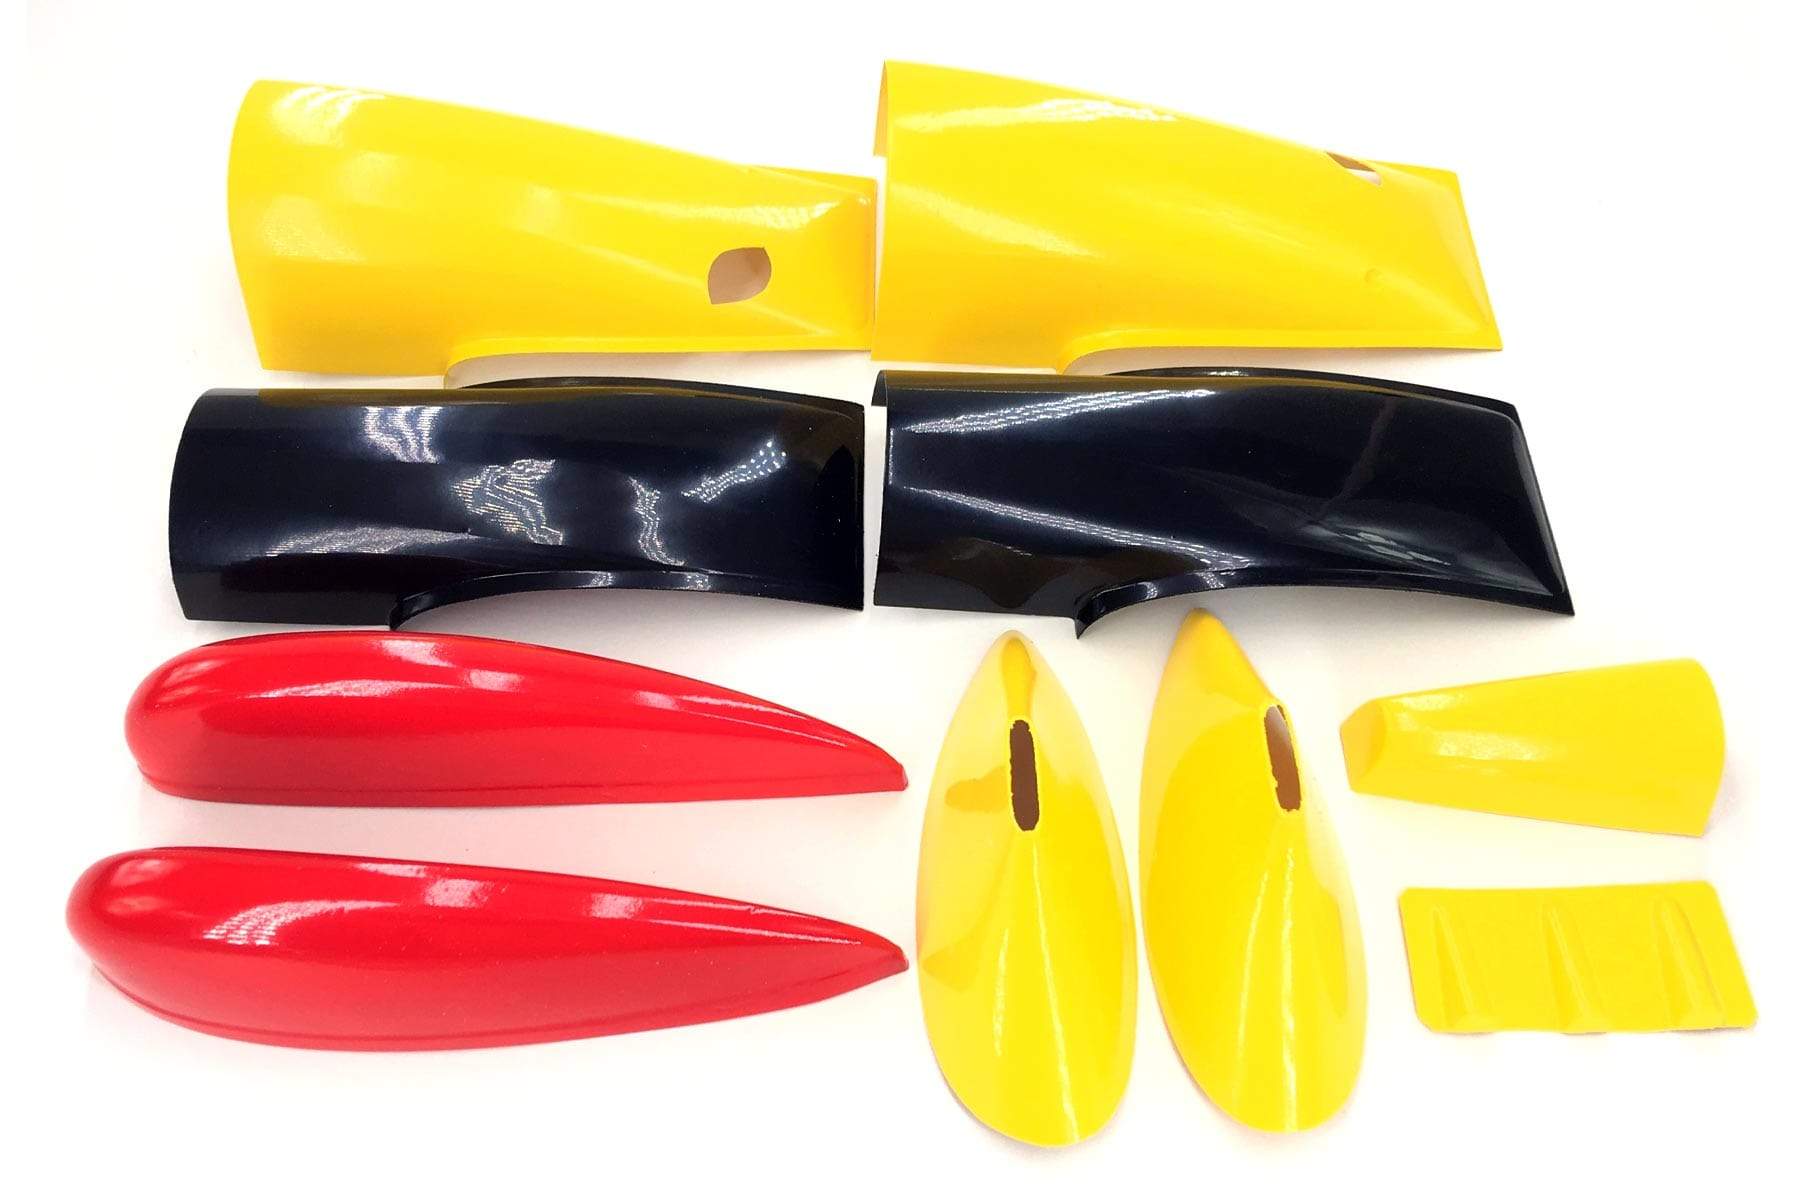 Nexa 1870mm DHC-6 Twin Otter Canadian Yellow Plastic Parts Set